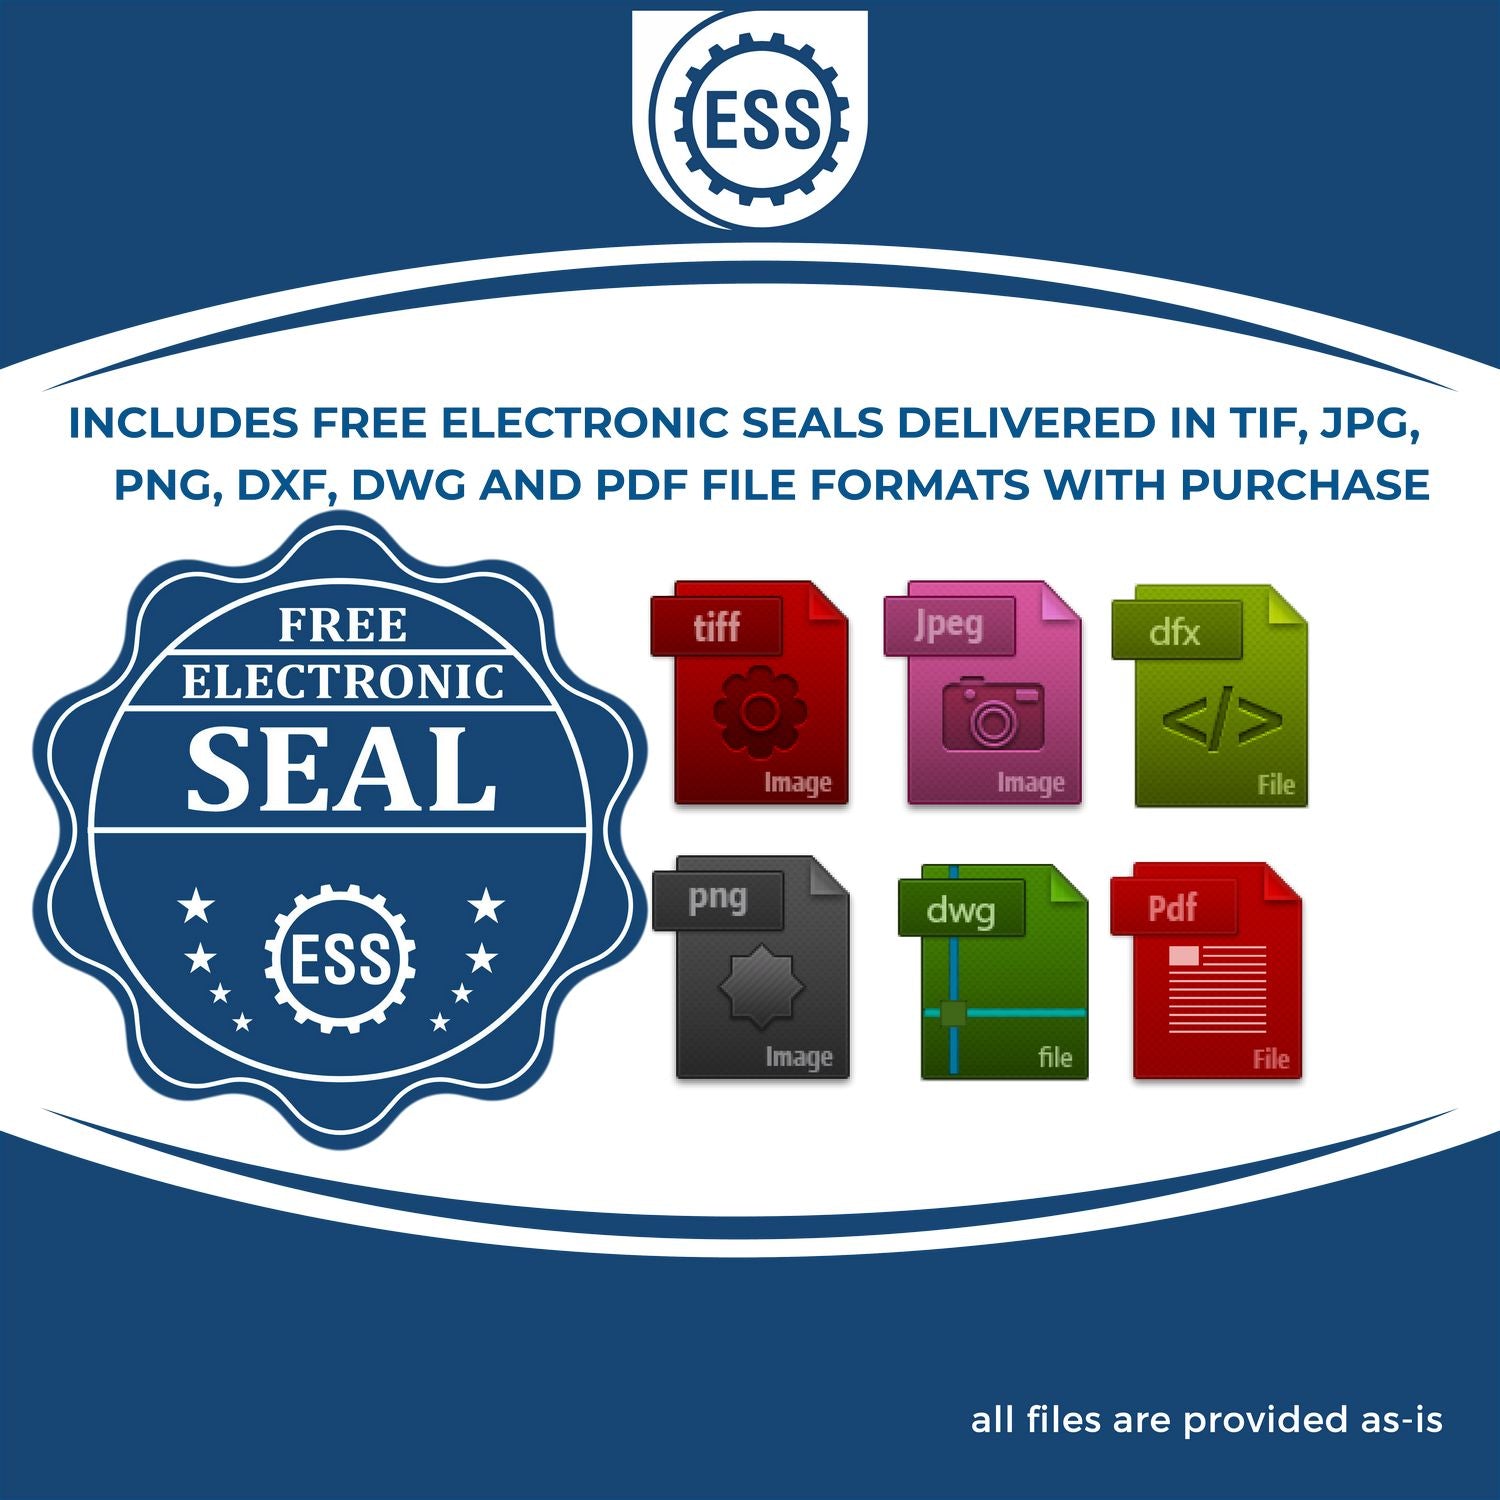 An infographic for the free electronic seal for the Tennessee Desk Landscape Architectural Seal Embosser illustrating the different file type icons such as DXF, DWG, TIF, JPG and PNG.